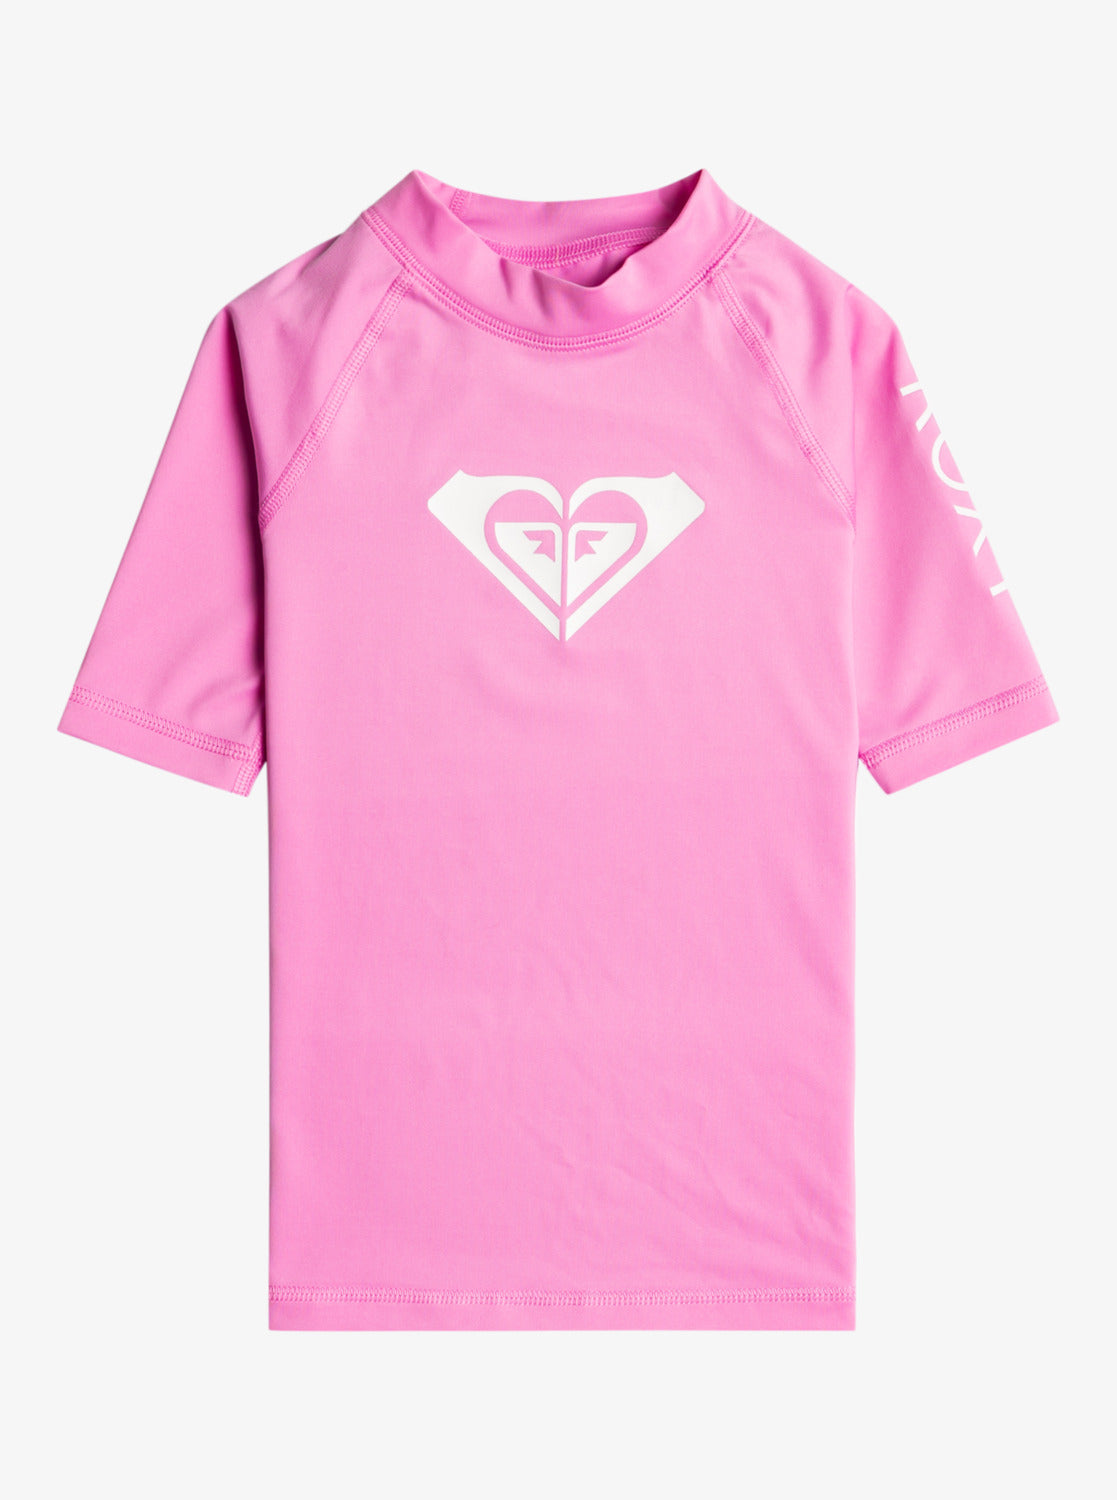 Roxy Whole Hearted Short Sleeved Rash Vest in Pink